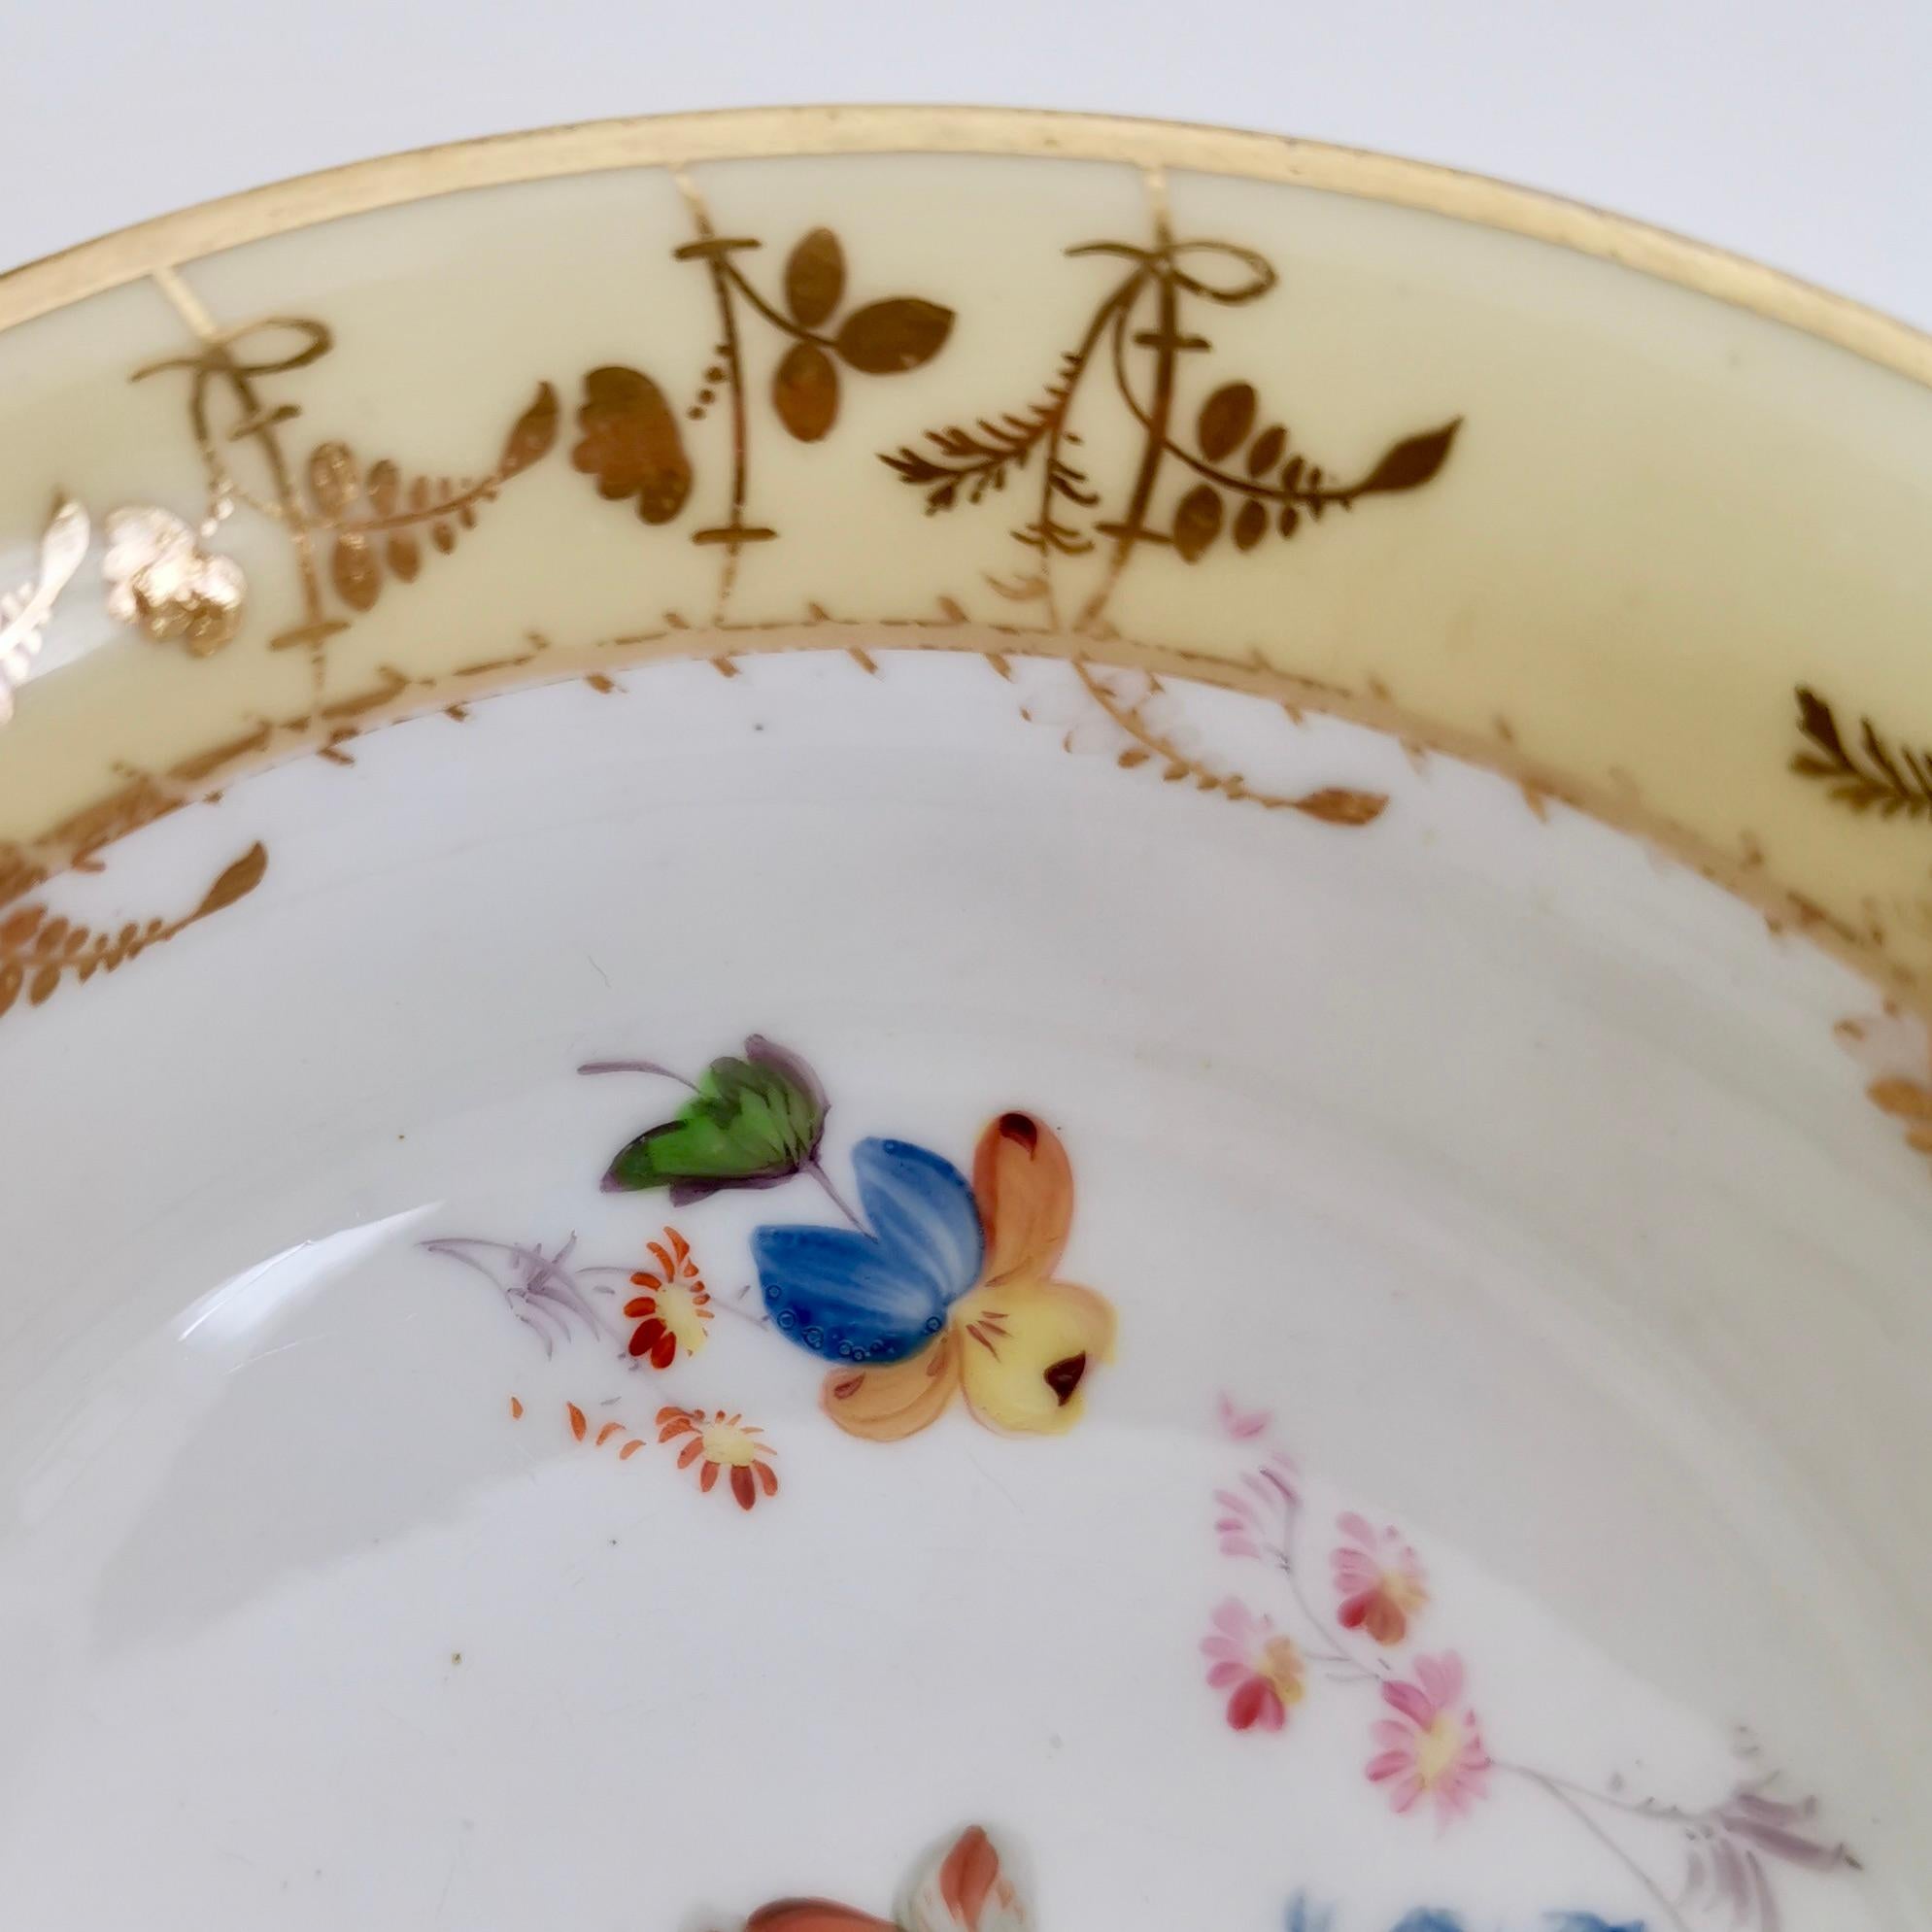 Minton Porcelain Teacup, Yellow with Hand Painted Flowers, Regency, circa 1825 4